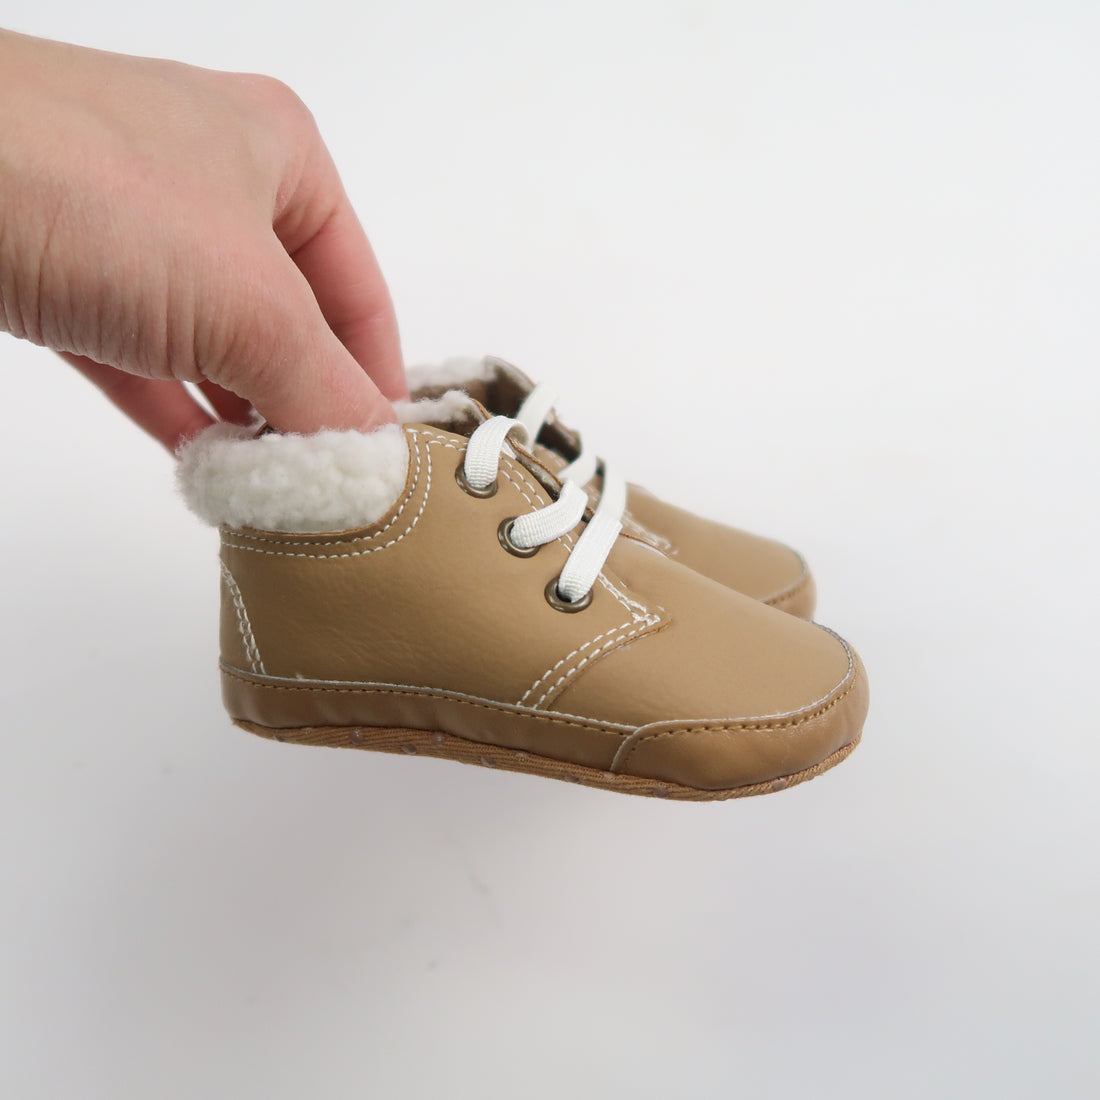 Old Navy - Shoes (Shoes - 6-12M)